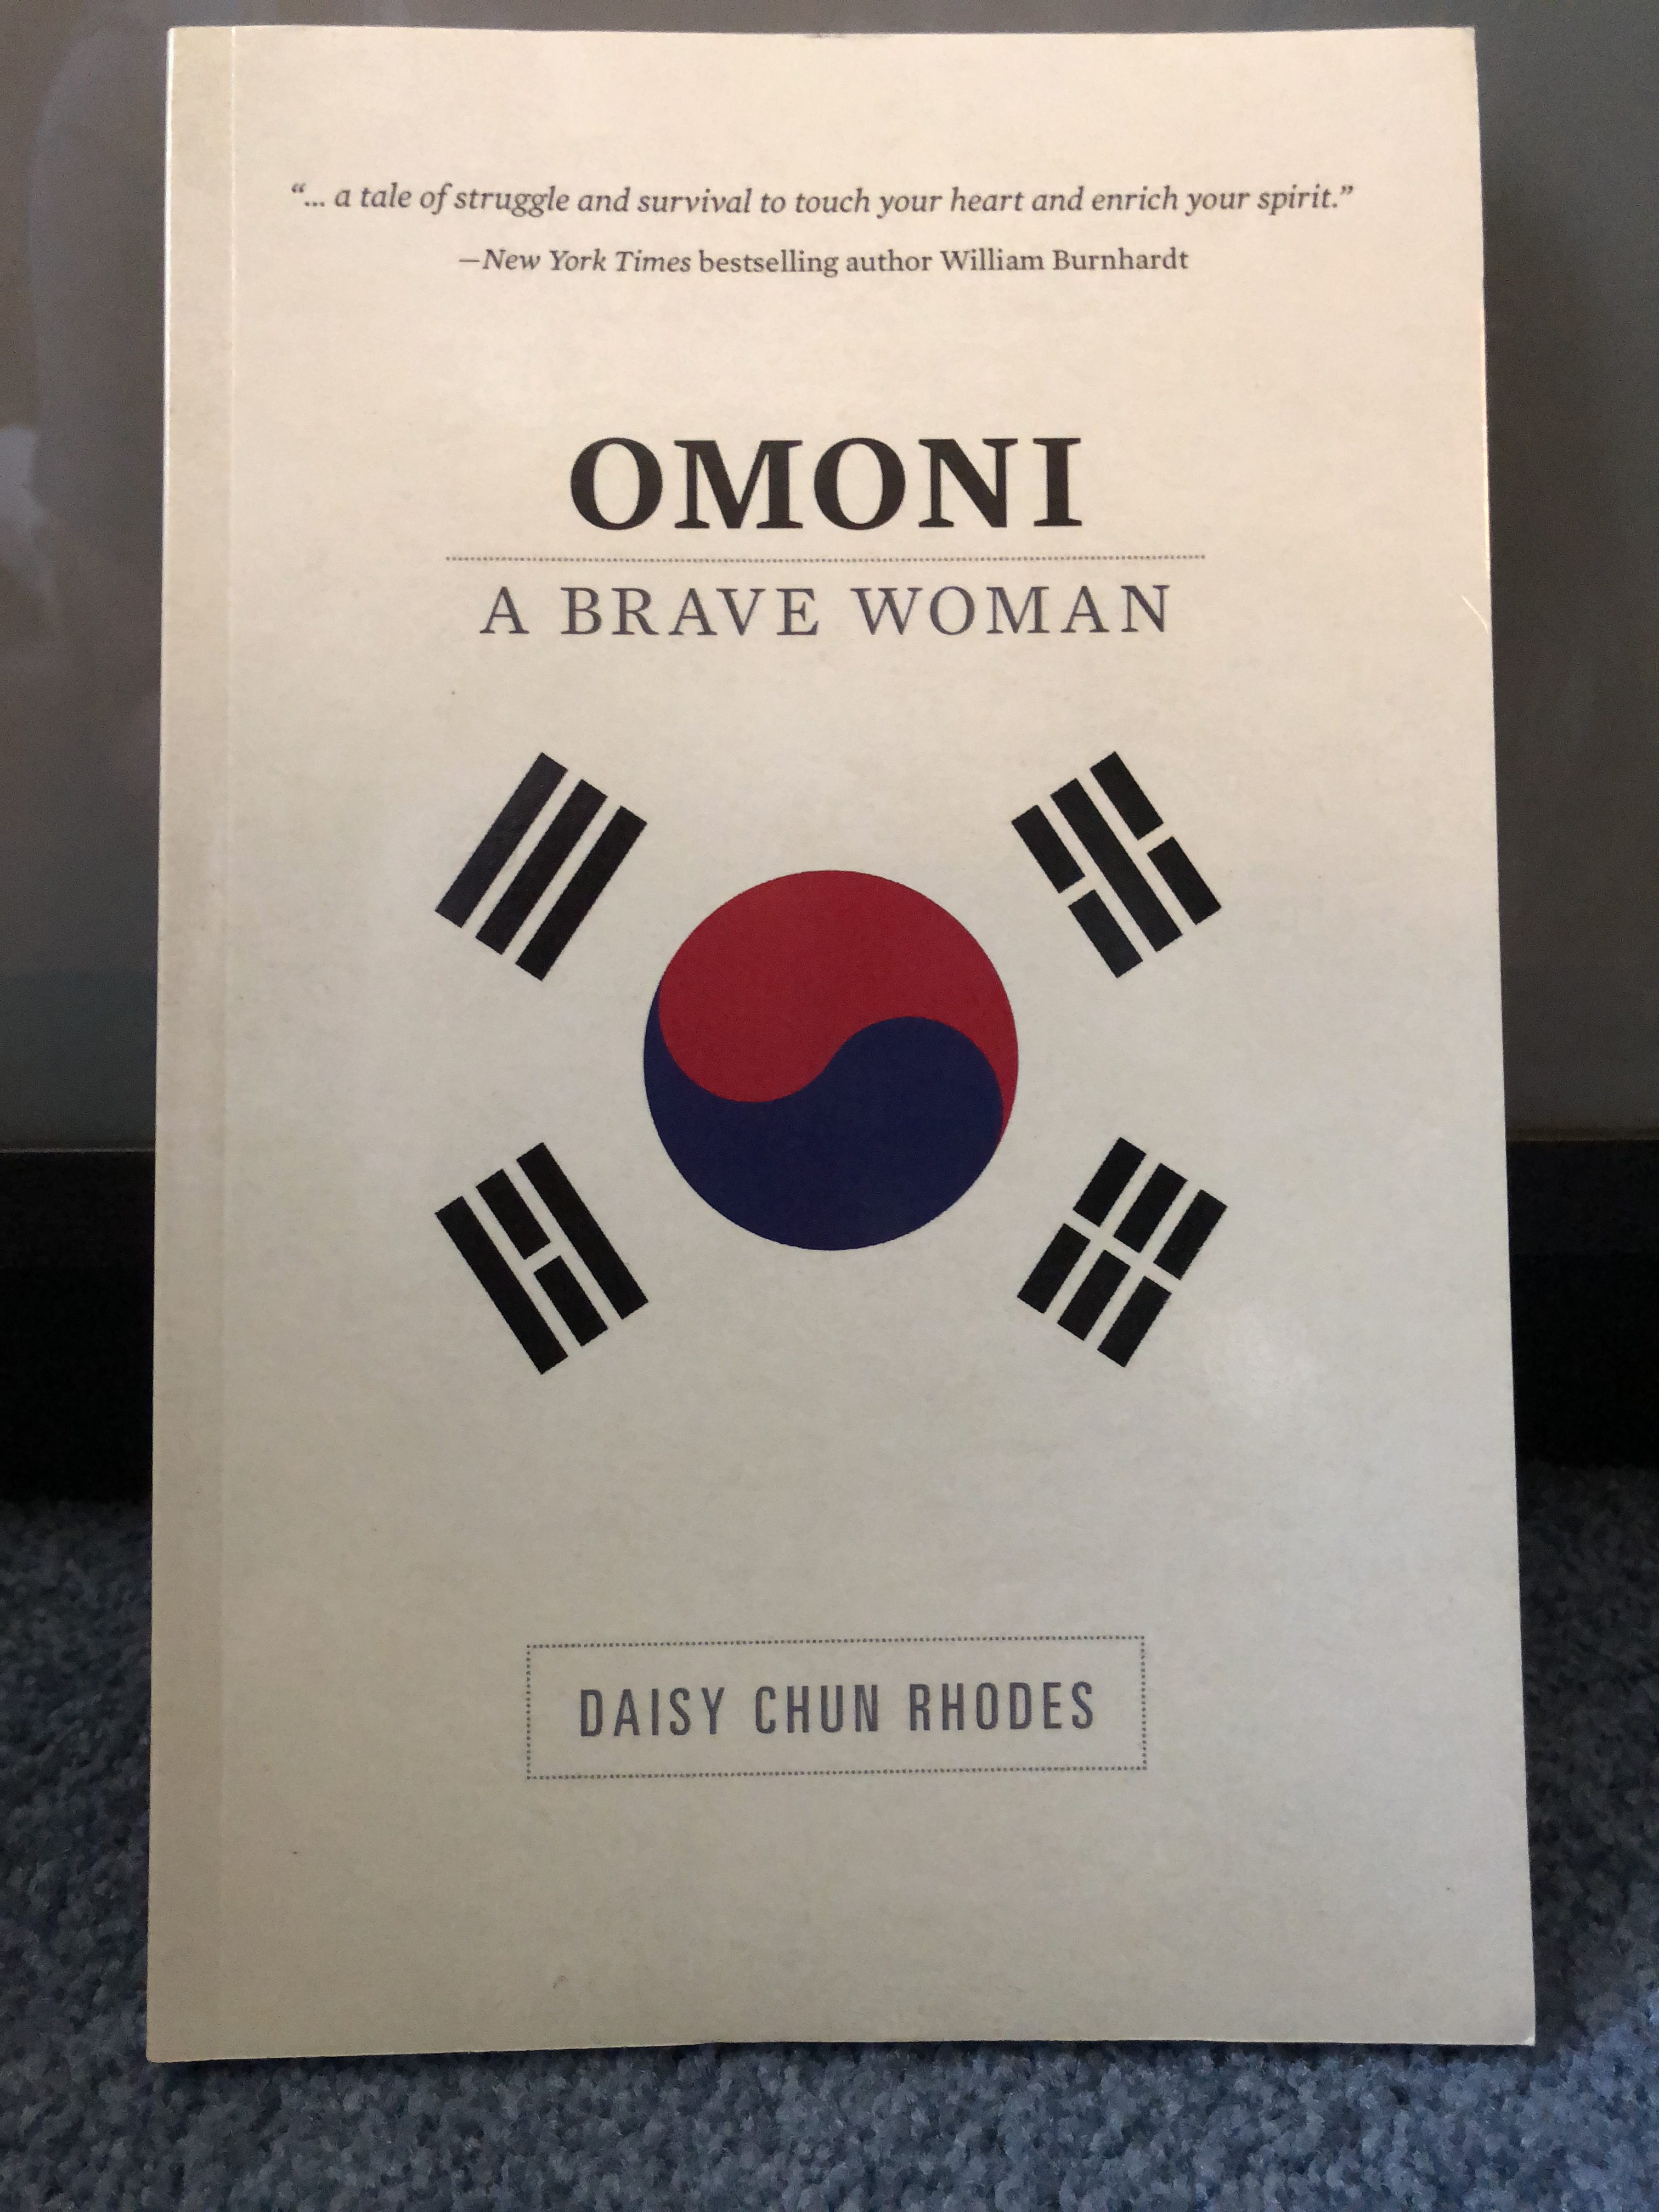 Featured image for “Omoni: A Brave Woman”